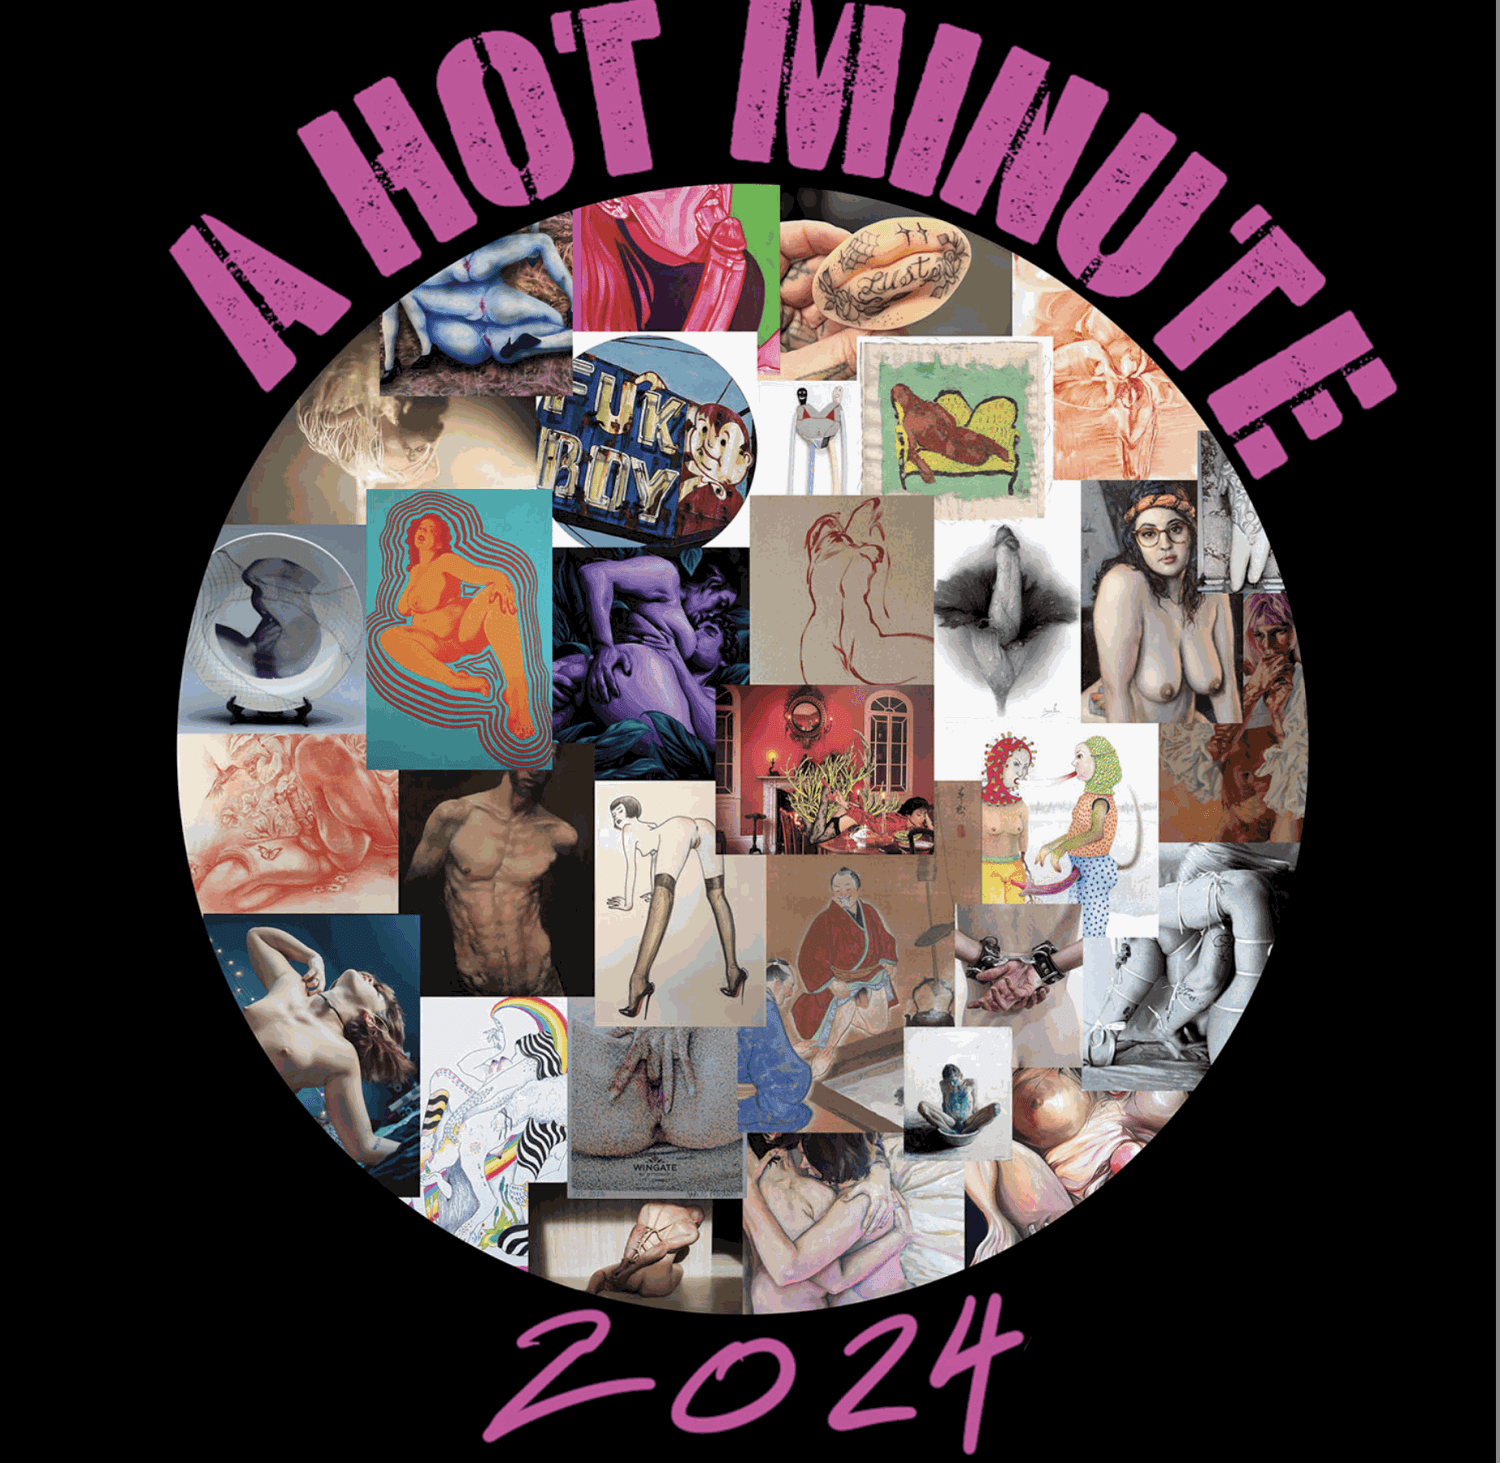 OPENING RECEPTION & CURATOR TALK >> A Hot Minute - erotic art show